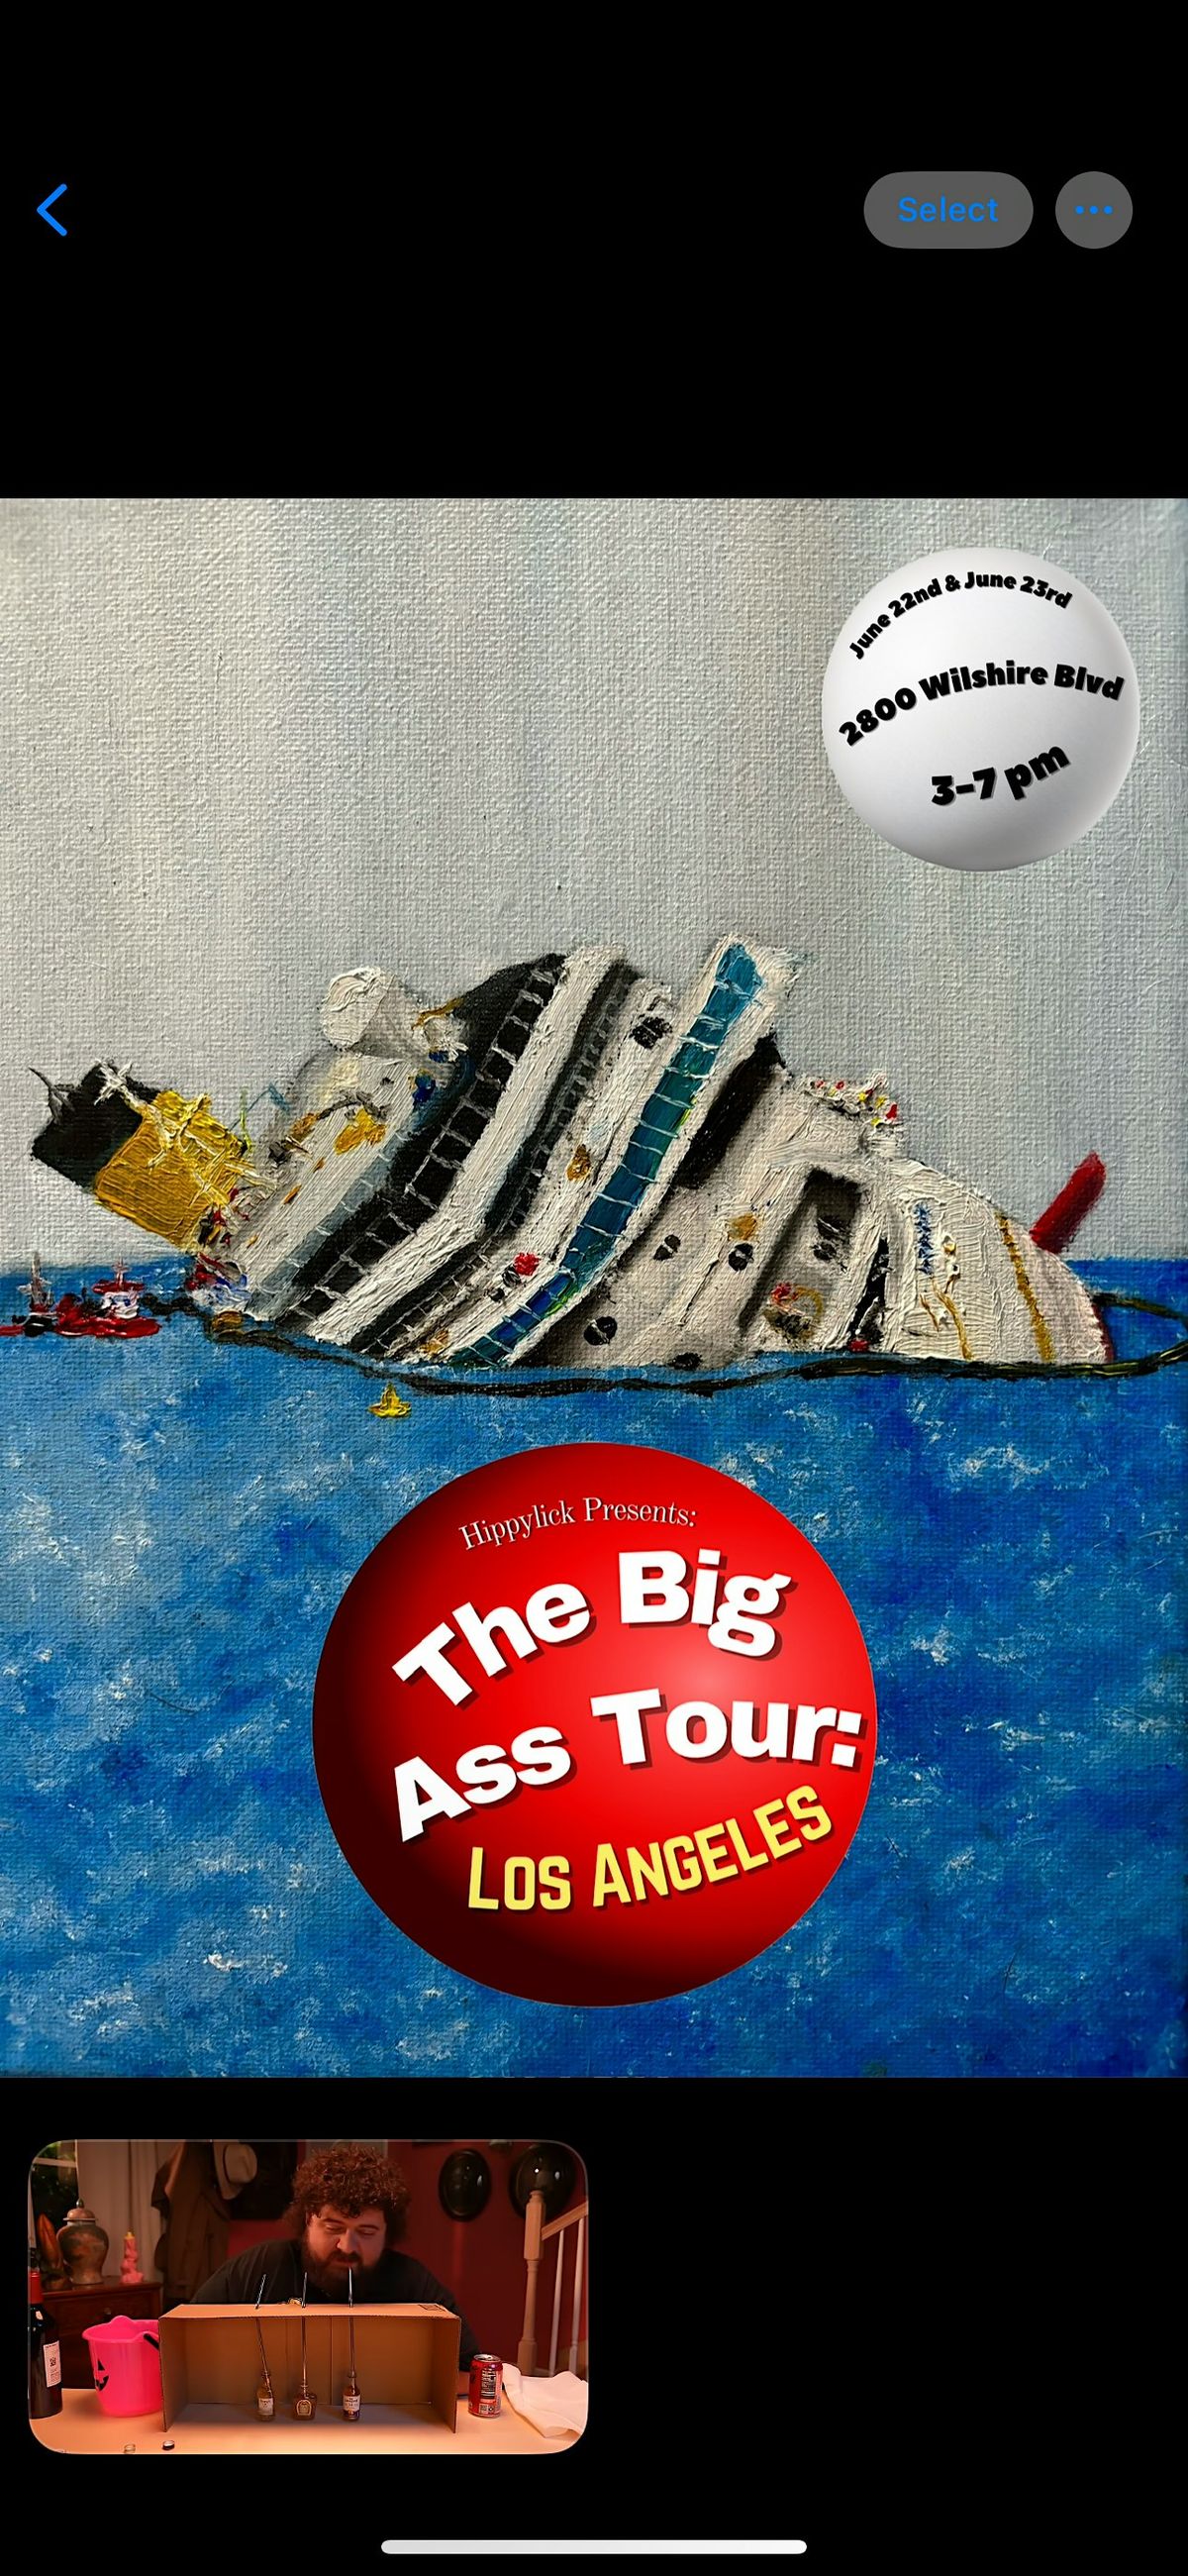 The Big Ass Tour: Los Angeles (Saturday showing)